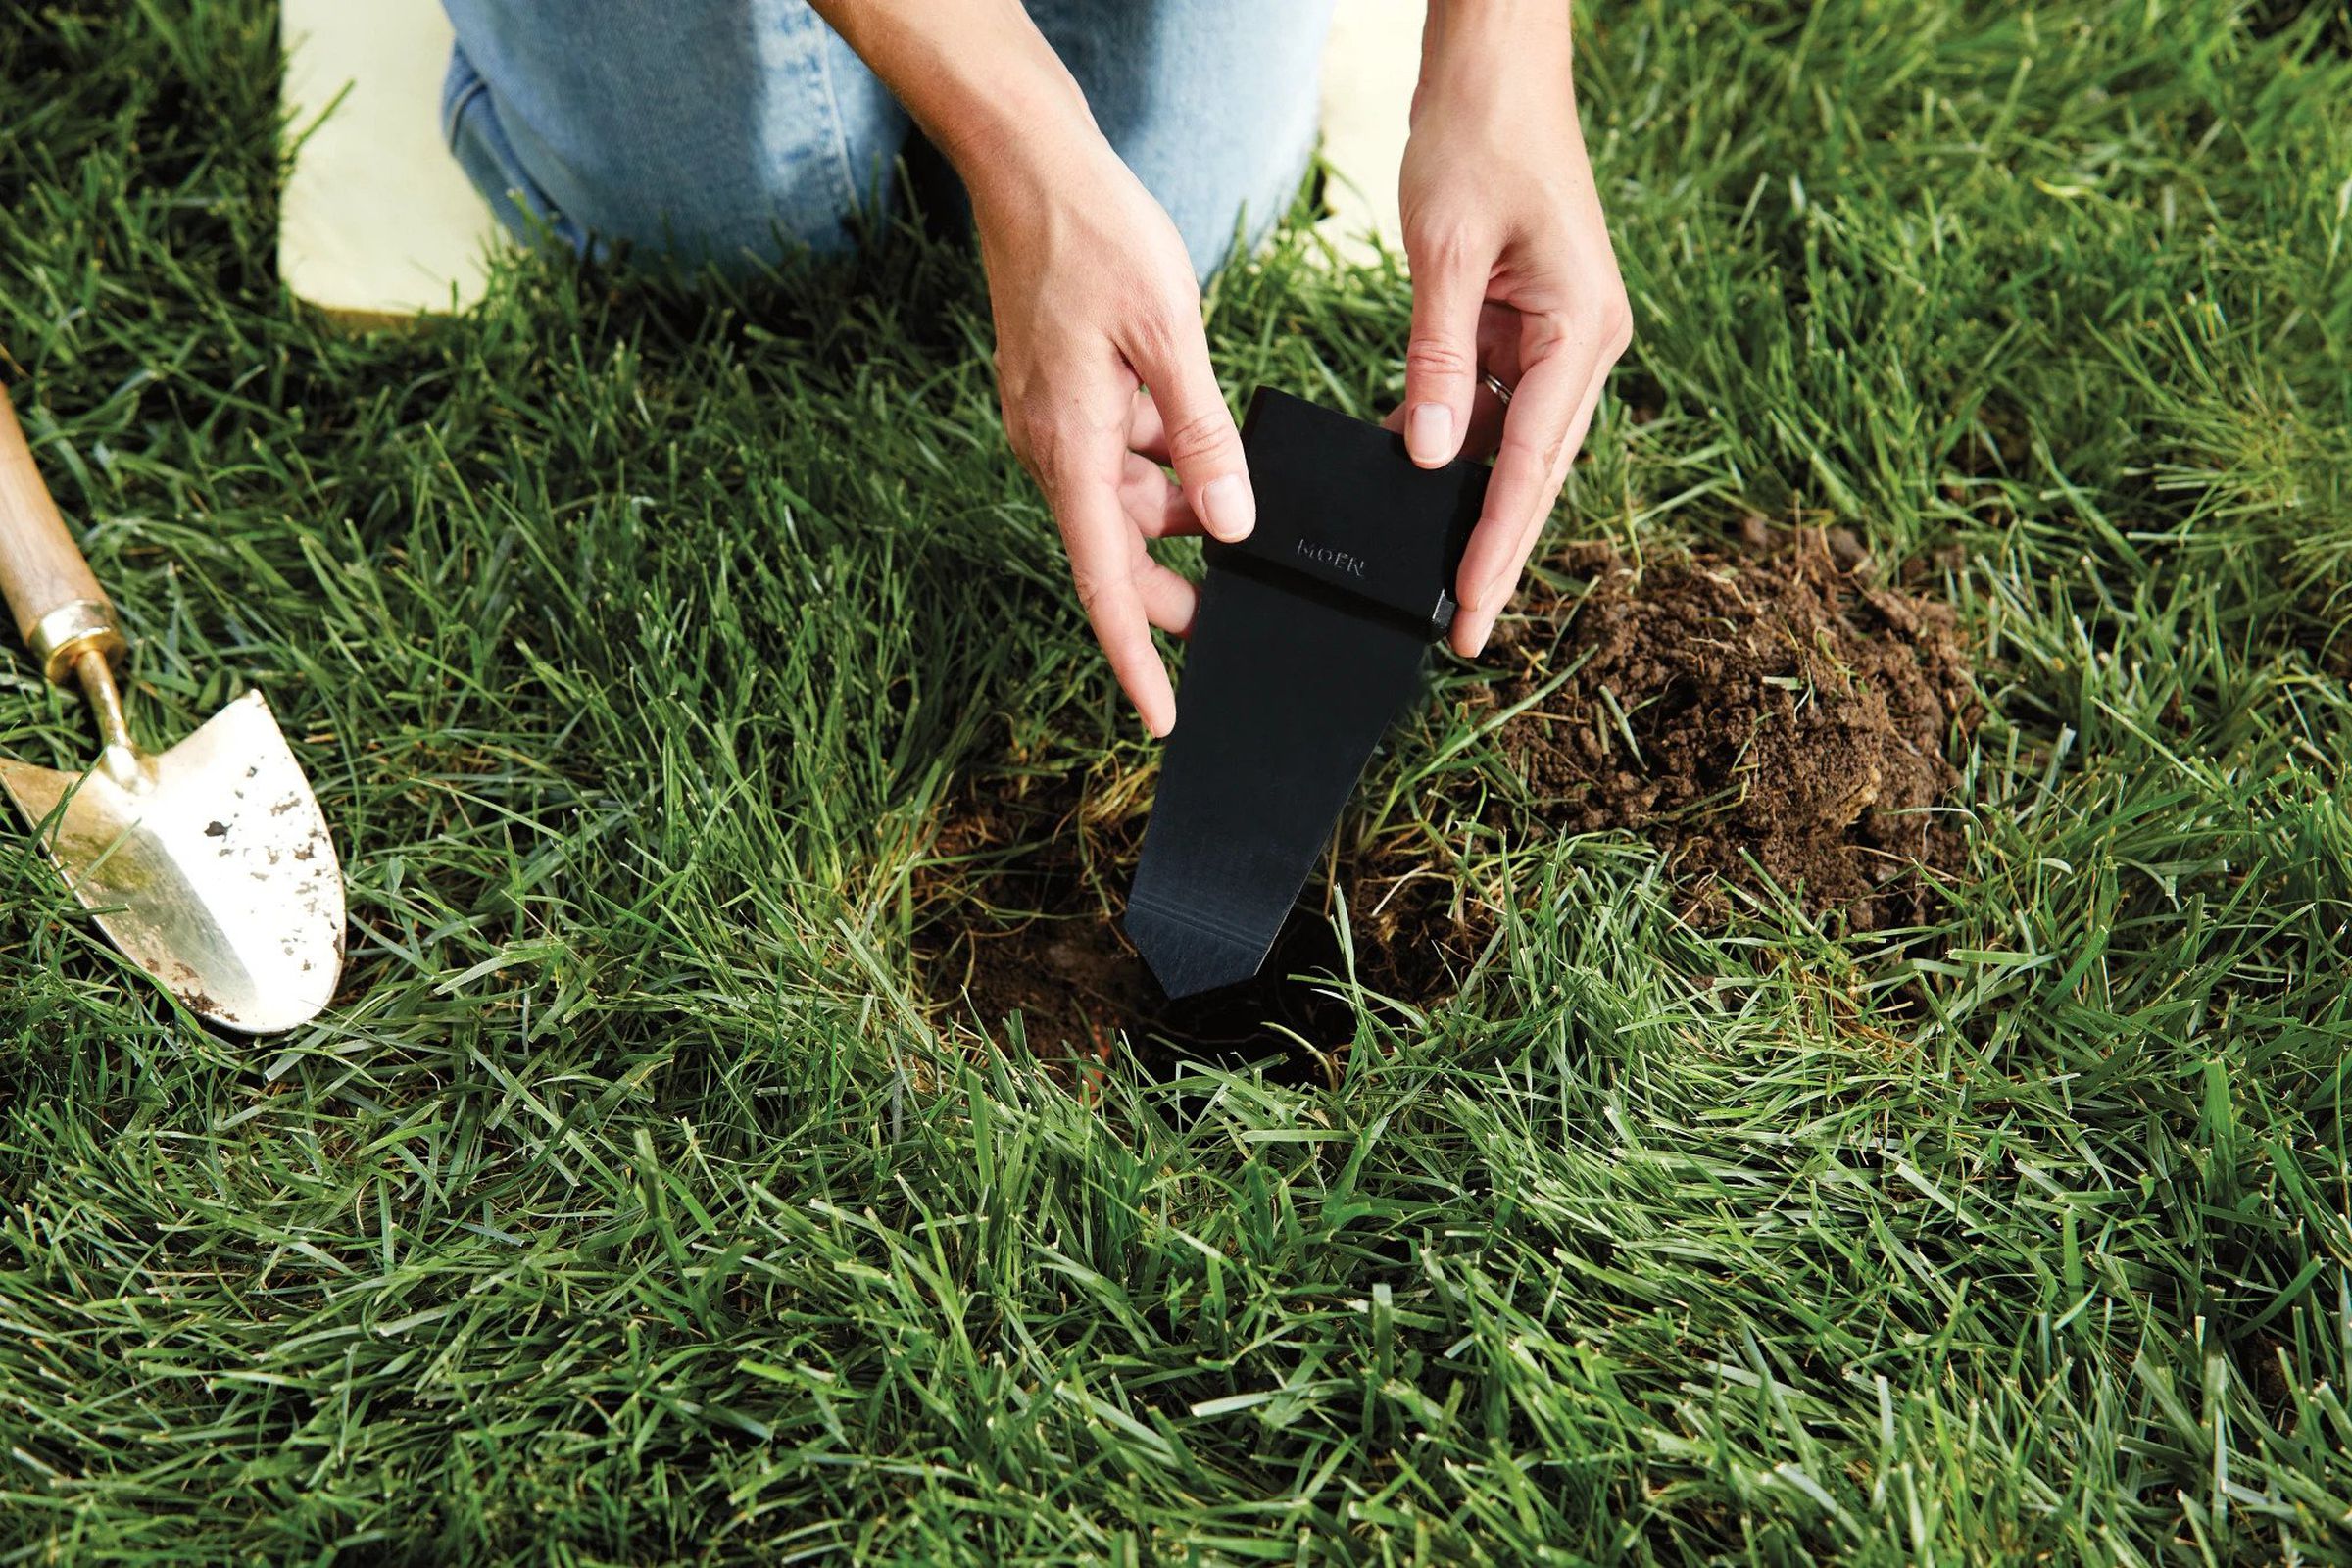 Moen's Smart Wireless Soil Sensors are placed in a hole on the lawn.